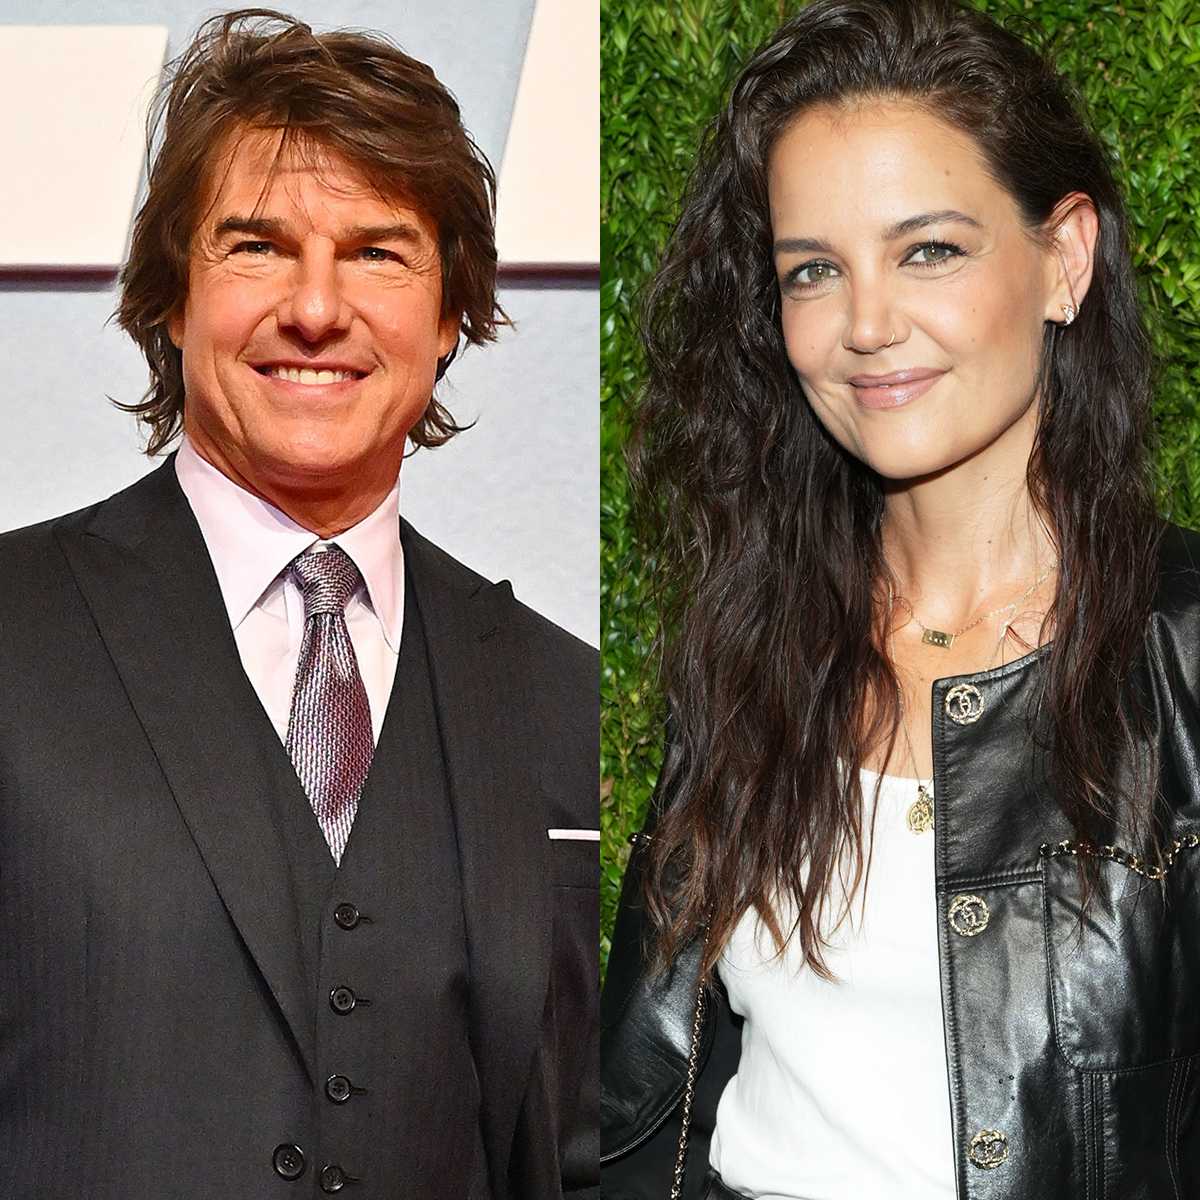 Image for article Tom Cruise and Katie Holmes Daughter Suri Reveals Her College Plans  E! Online  E! NEWS